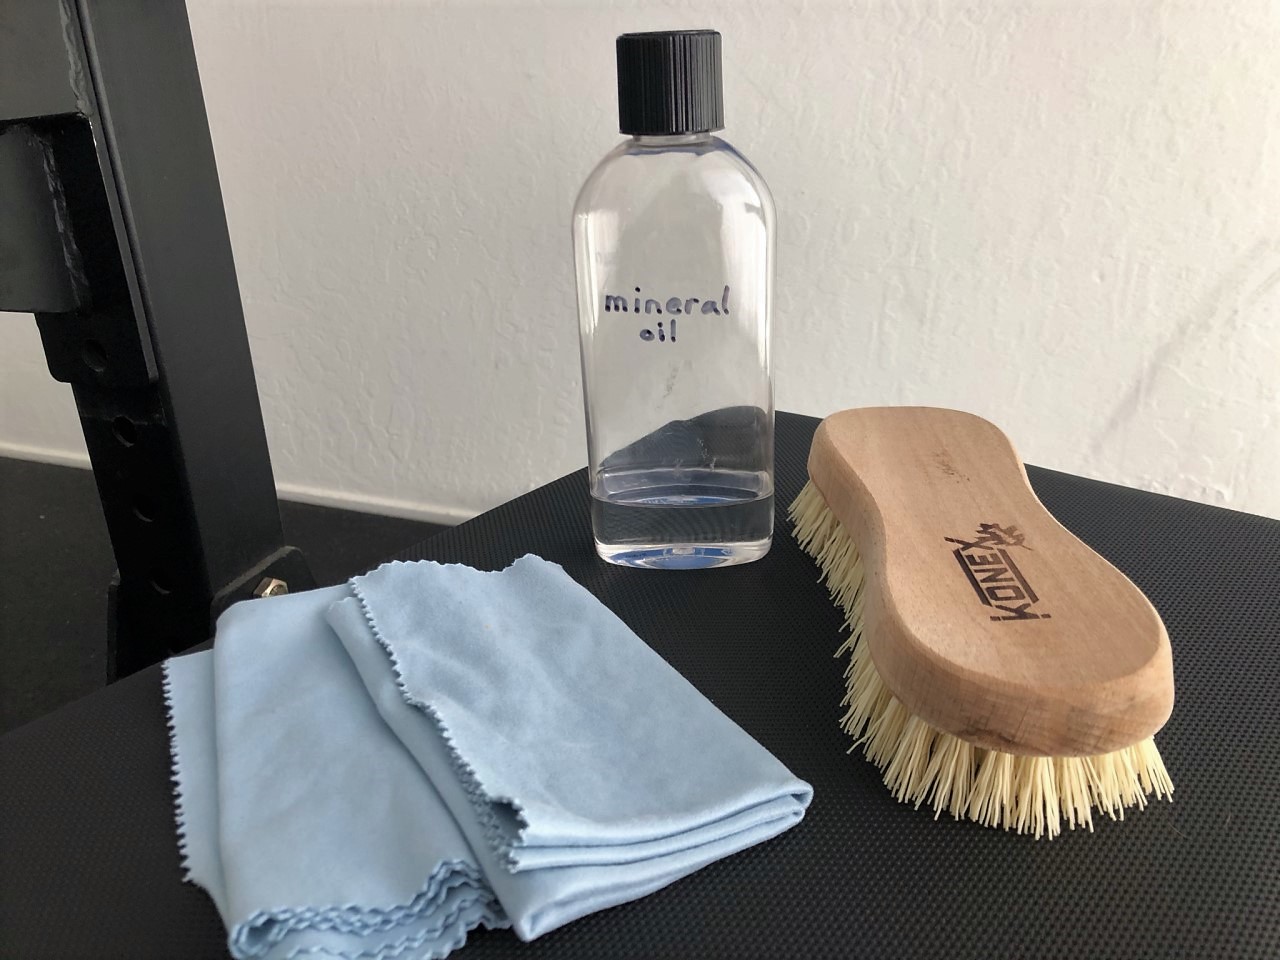 barbell maintenance brush, towel and mineral oil